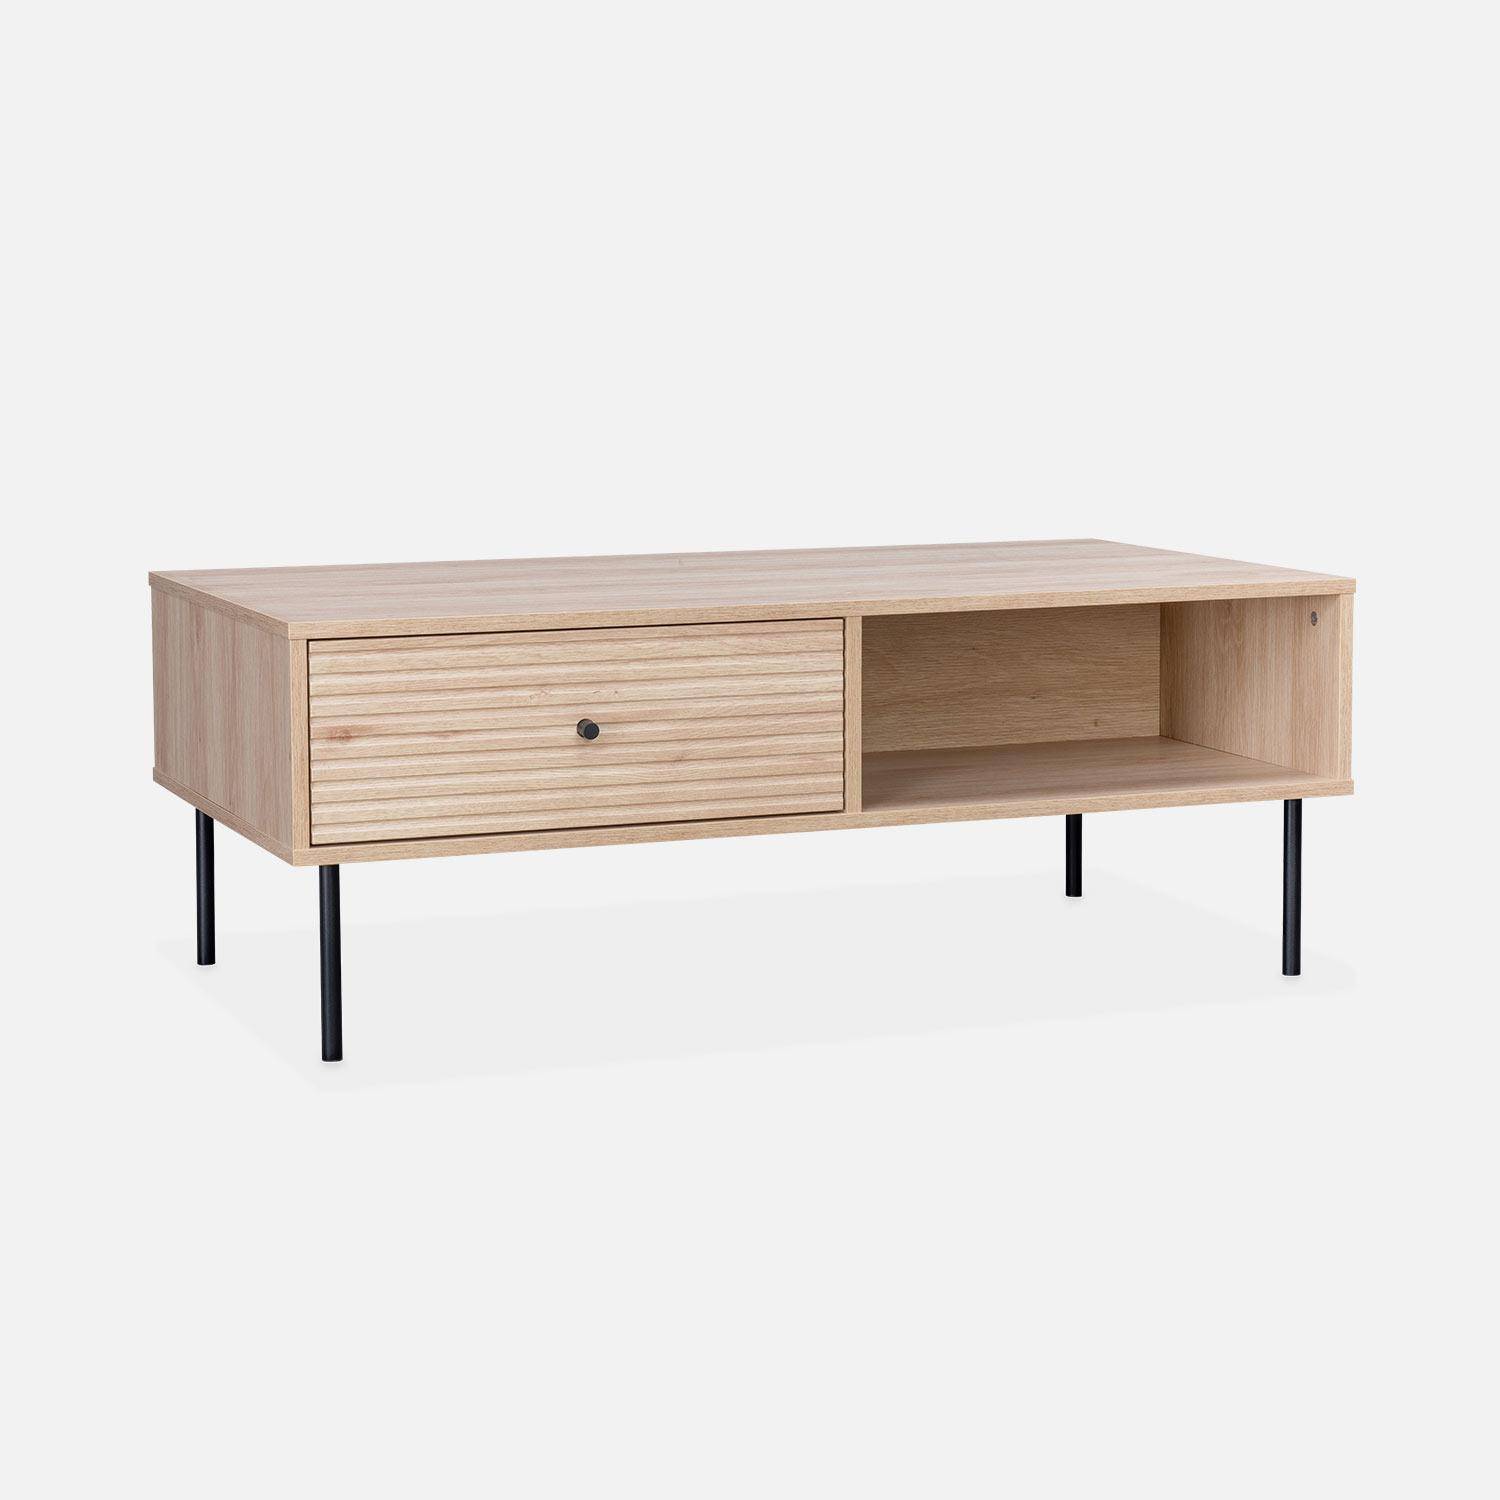 Grooved wood-effect coffee table with one drawer and storage nook, 110x59x41cm - Braga - Natural Photo3